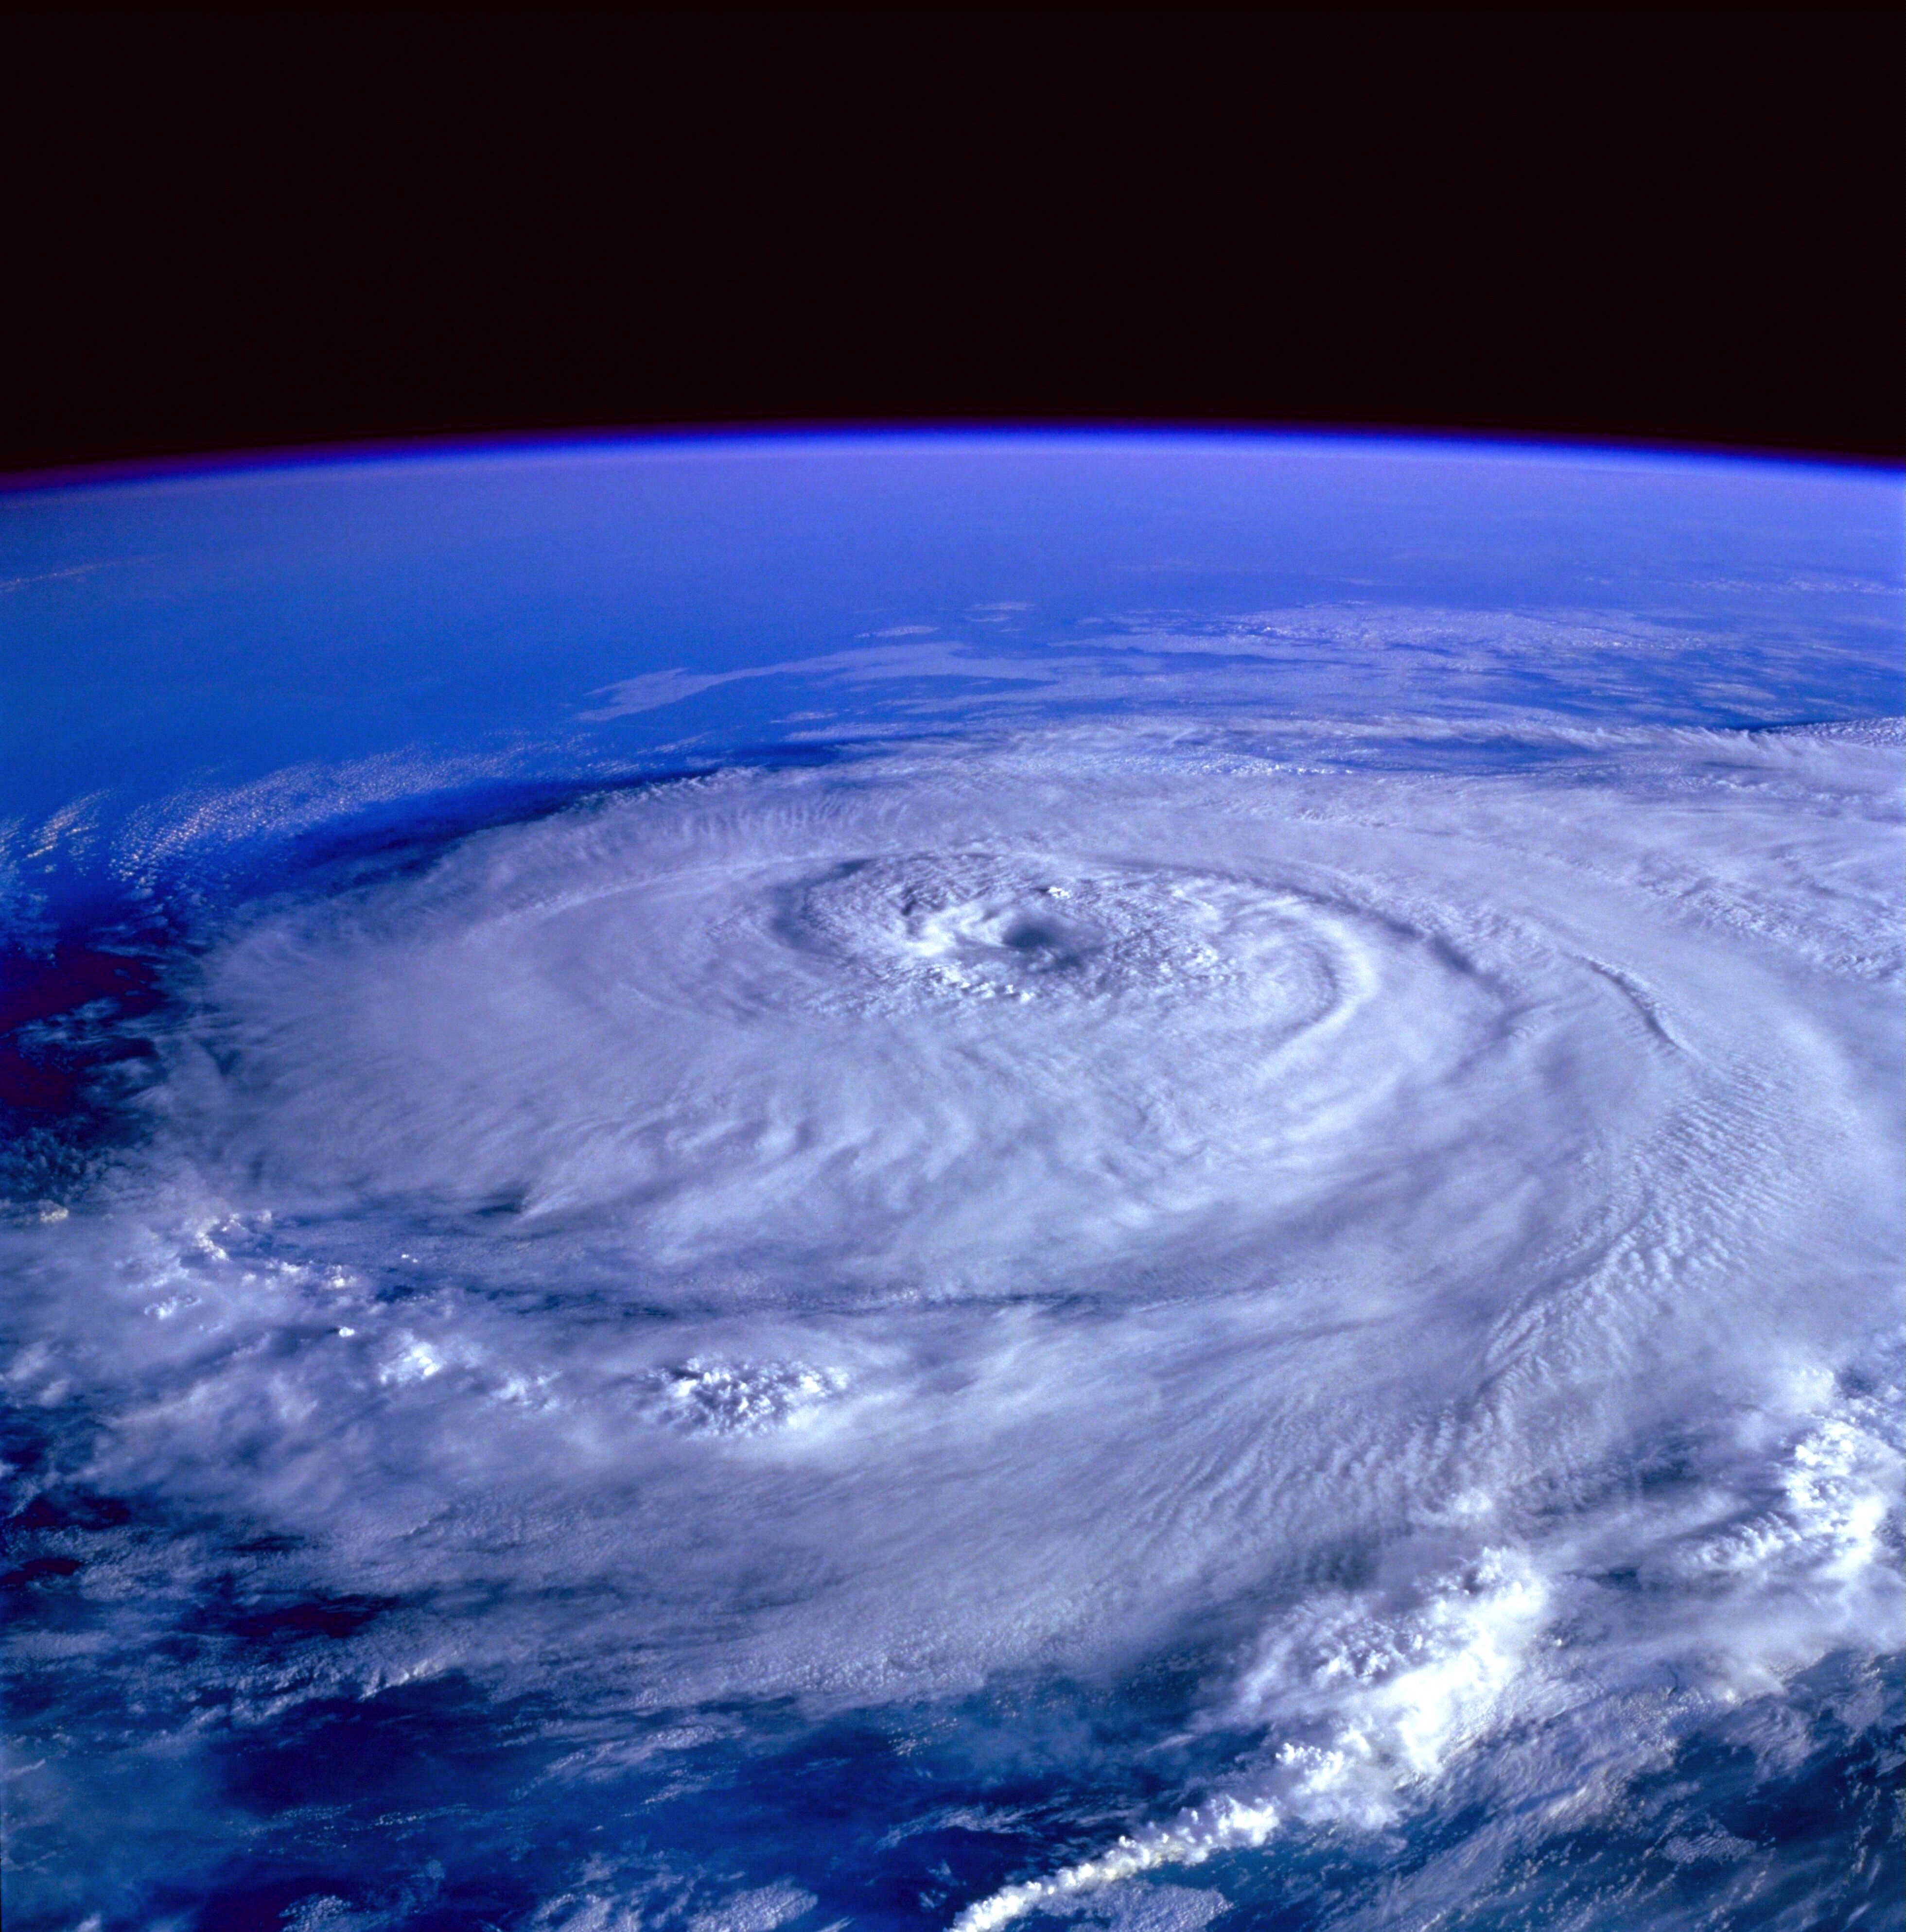 Photo by Pixabay: https://www.pexels.com/photo/eye-of-the-storm-image-from-outer-space-71116/